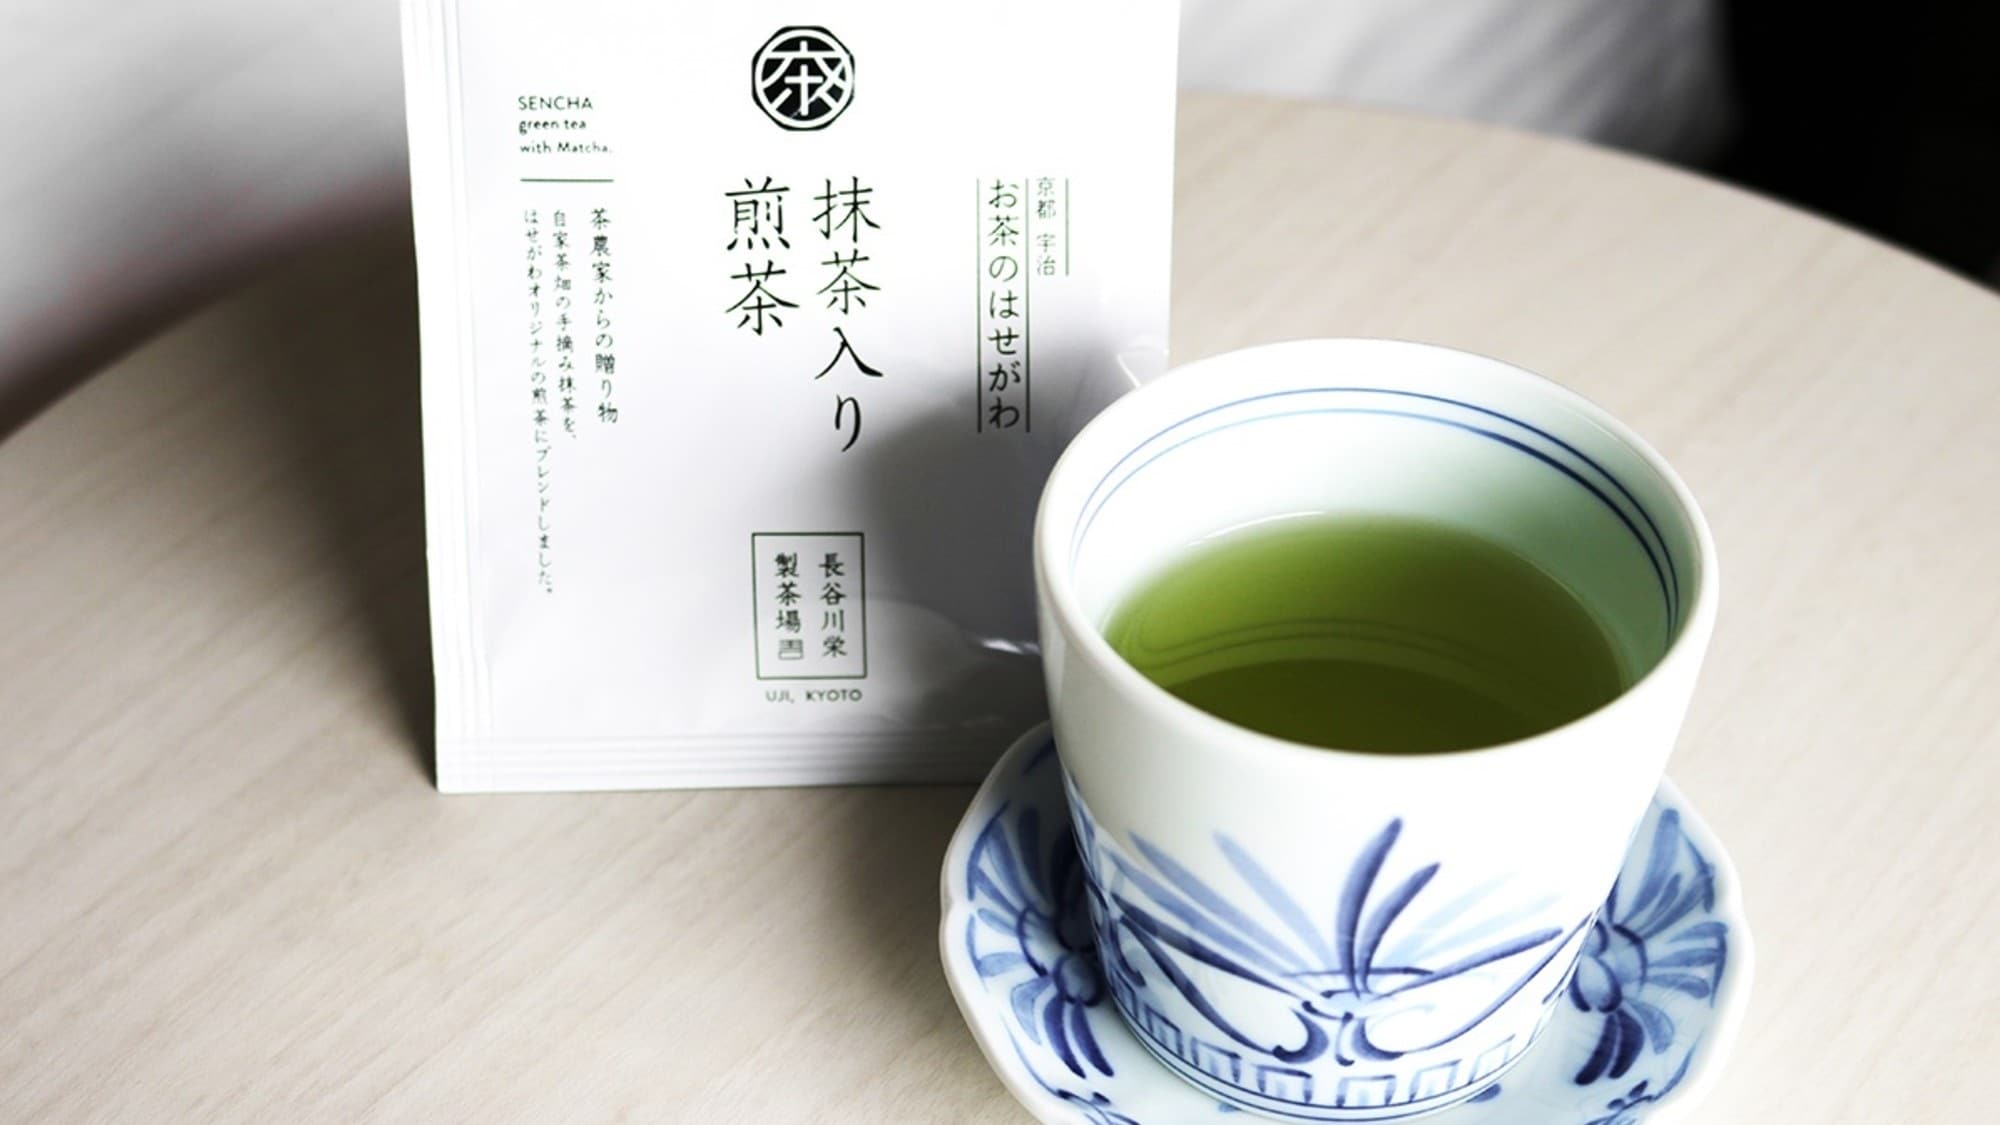 [Available in all rooms] 100% Uji tea leaves We offer sencha tea bags containing matcha from Hasegawa Sakae teahouse.